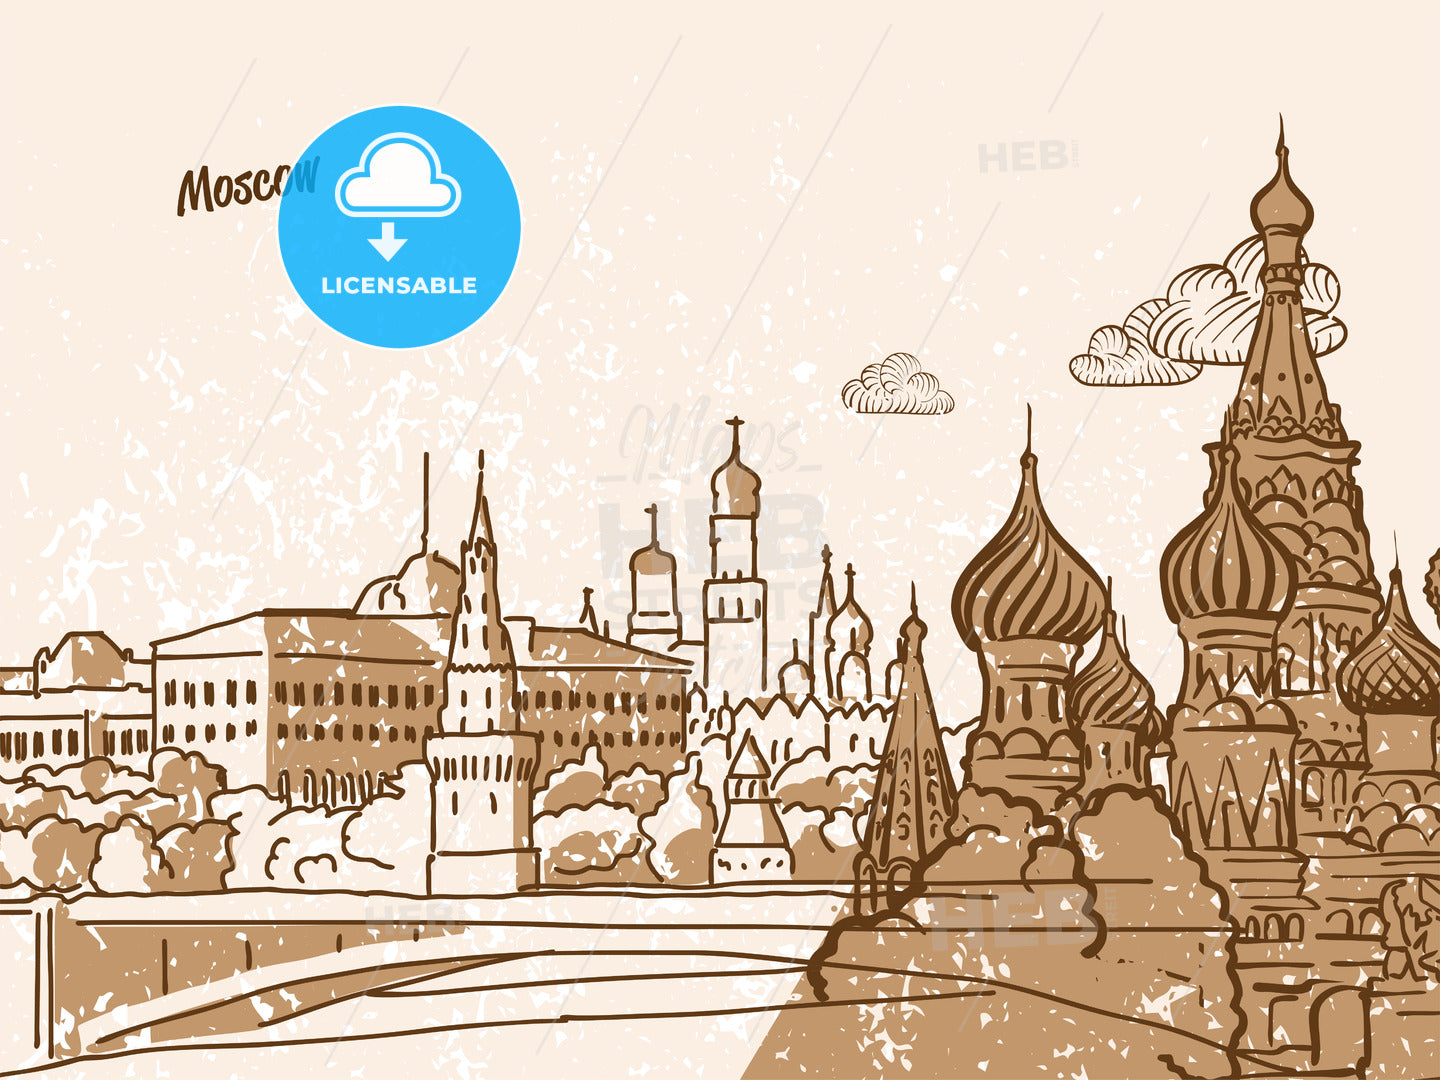 Moscow, Russia, Greeting Card – instant download